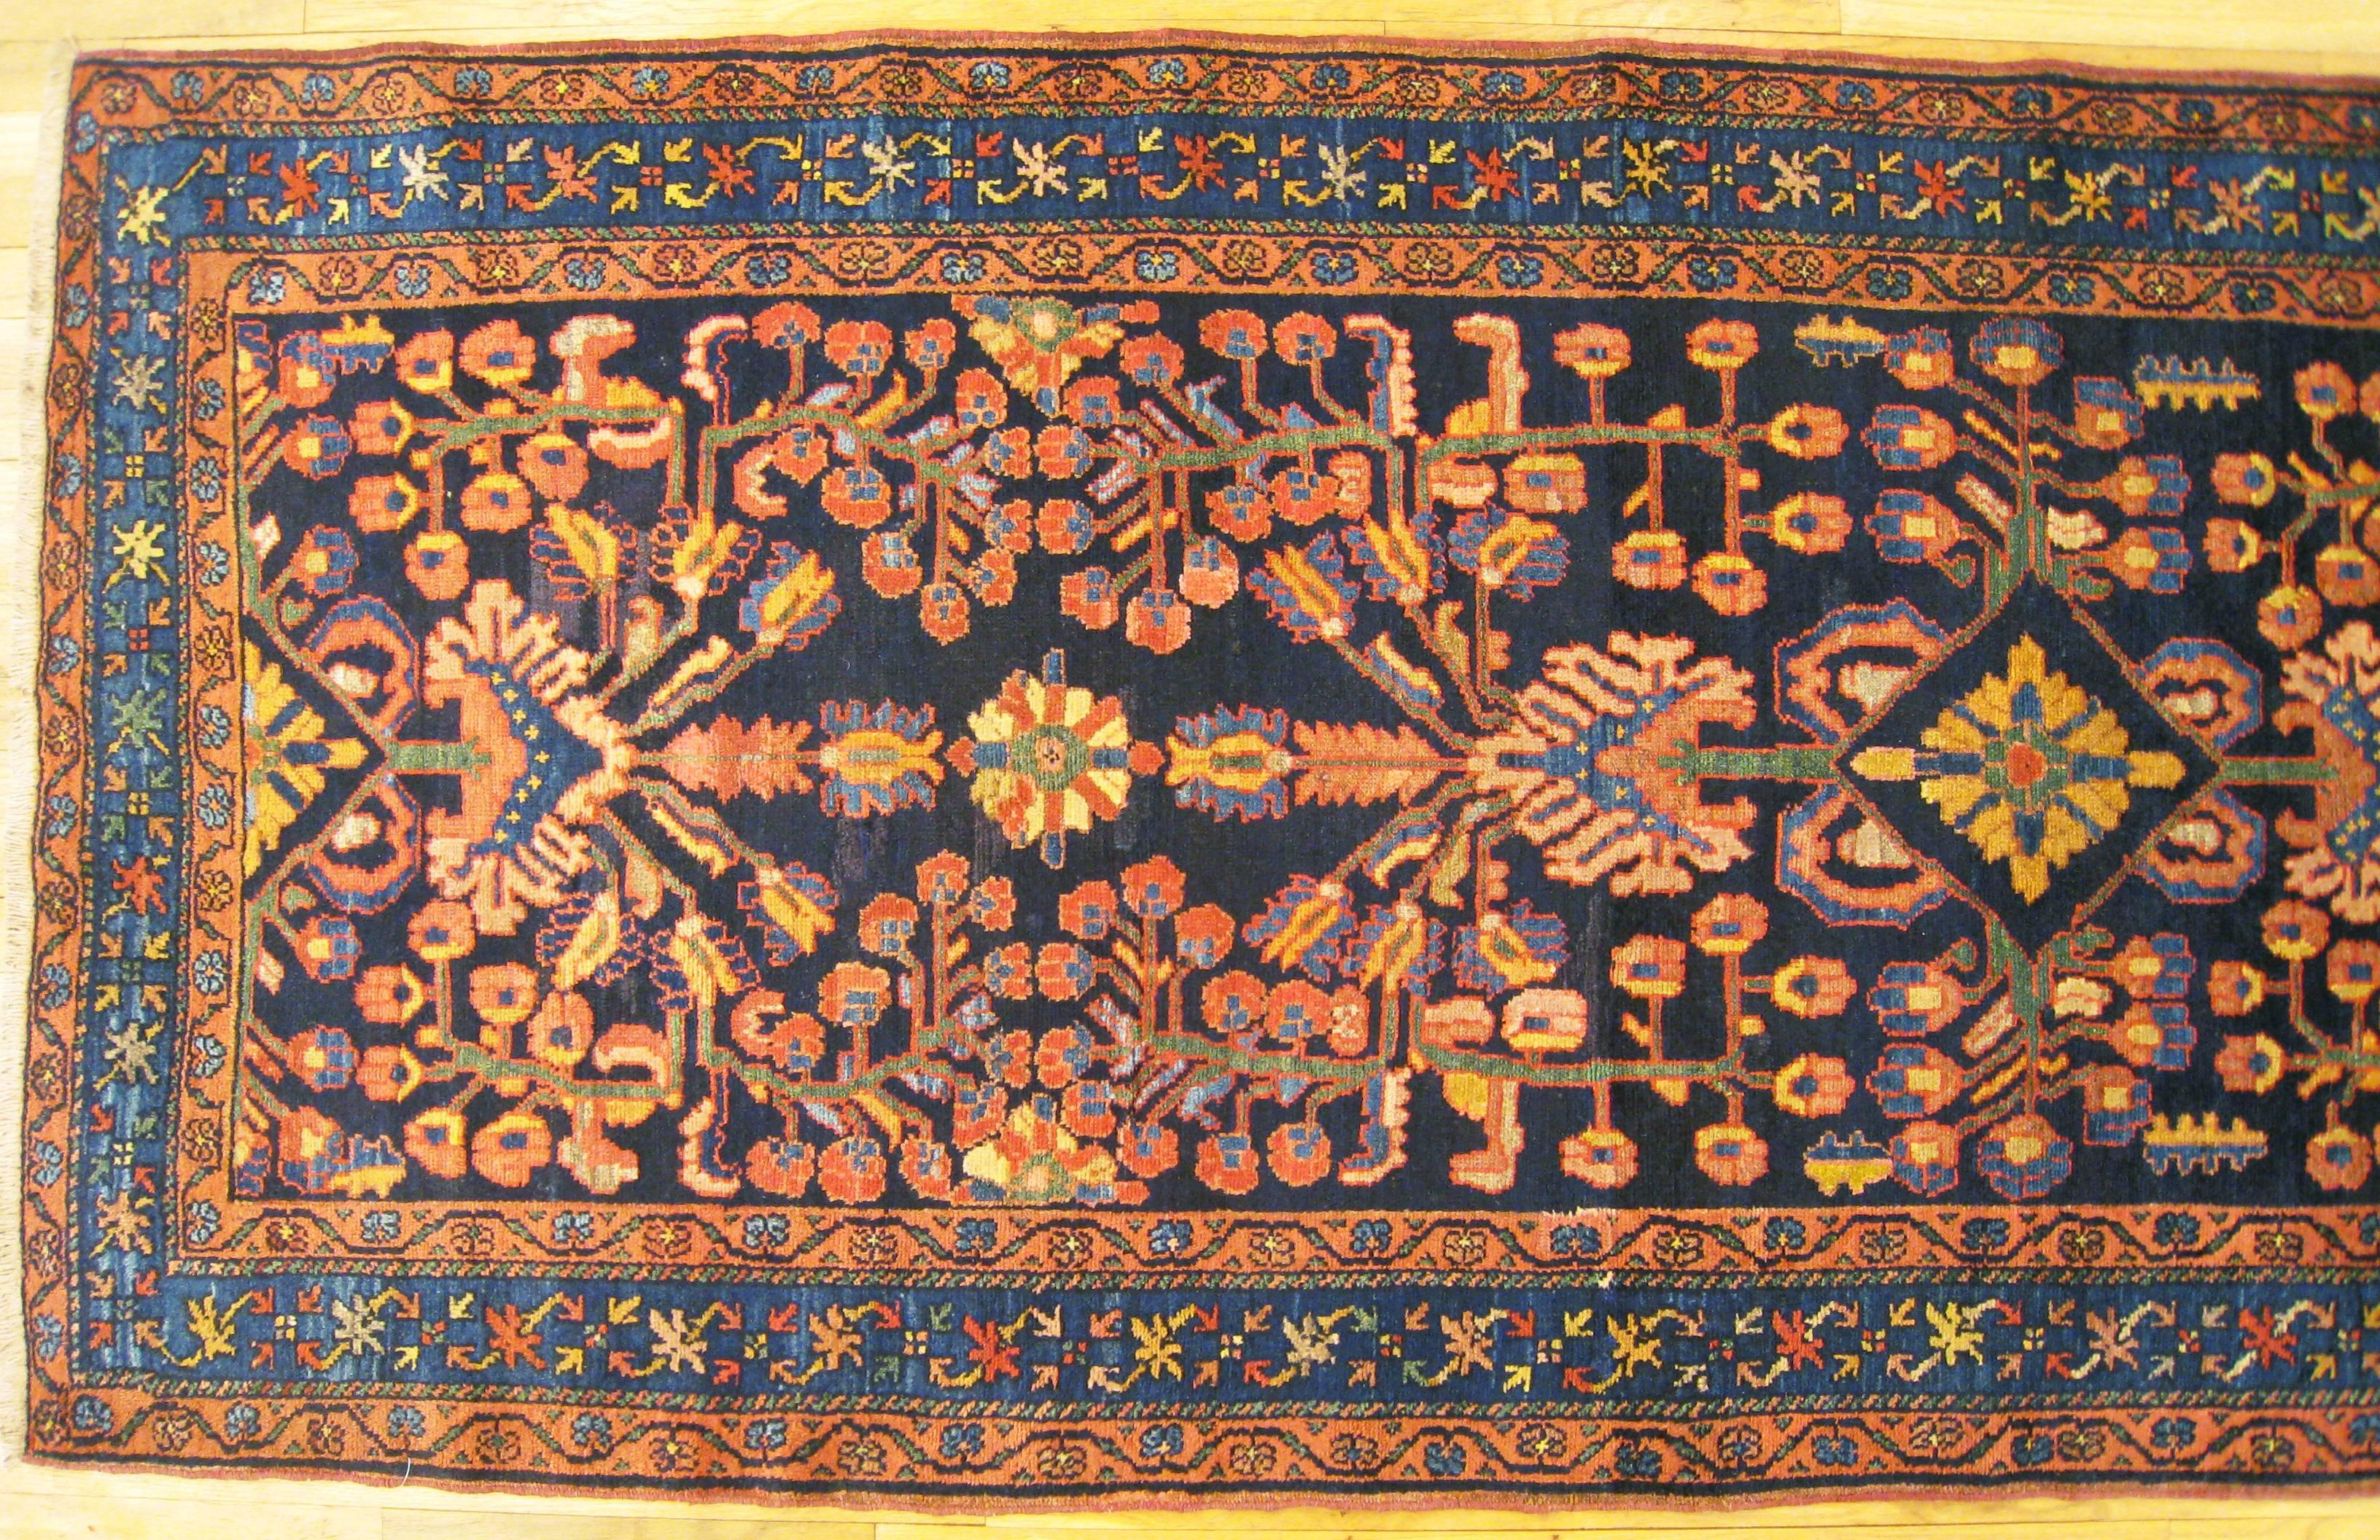 Hand-Woven Antique Persian Hamadan Runner with Floral Design and Jewel Tones, circa 1920